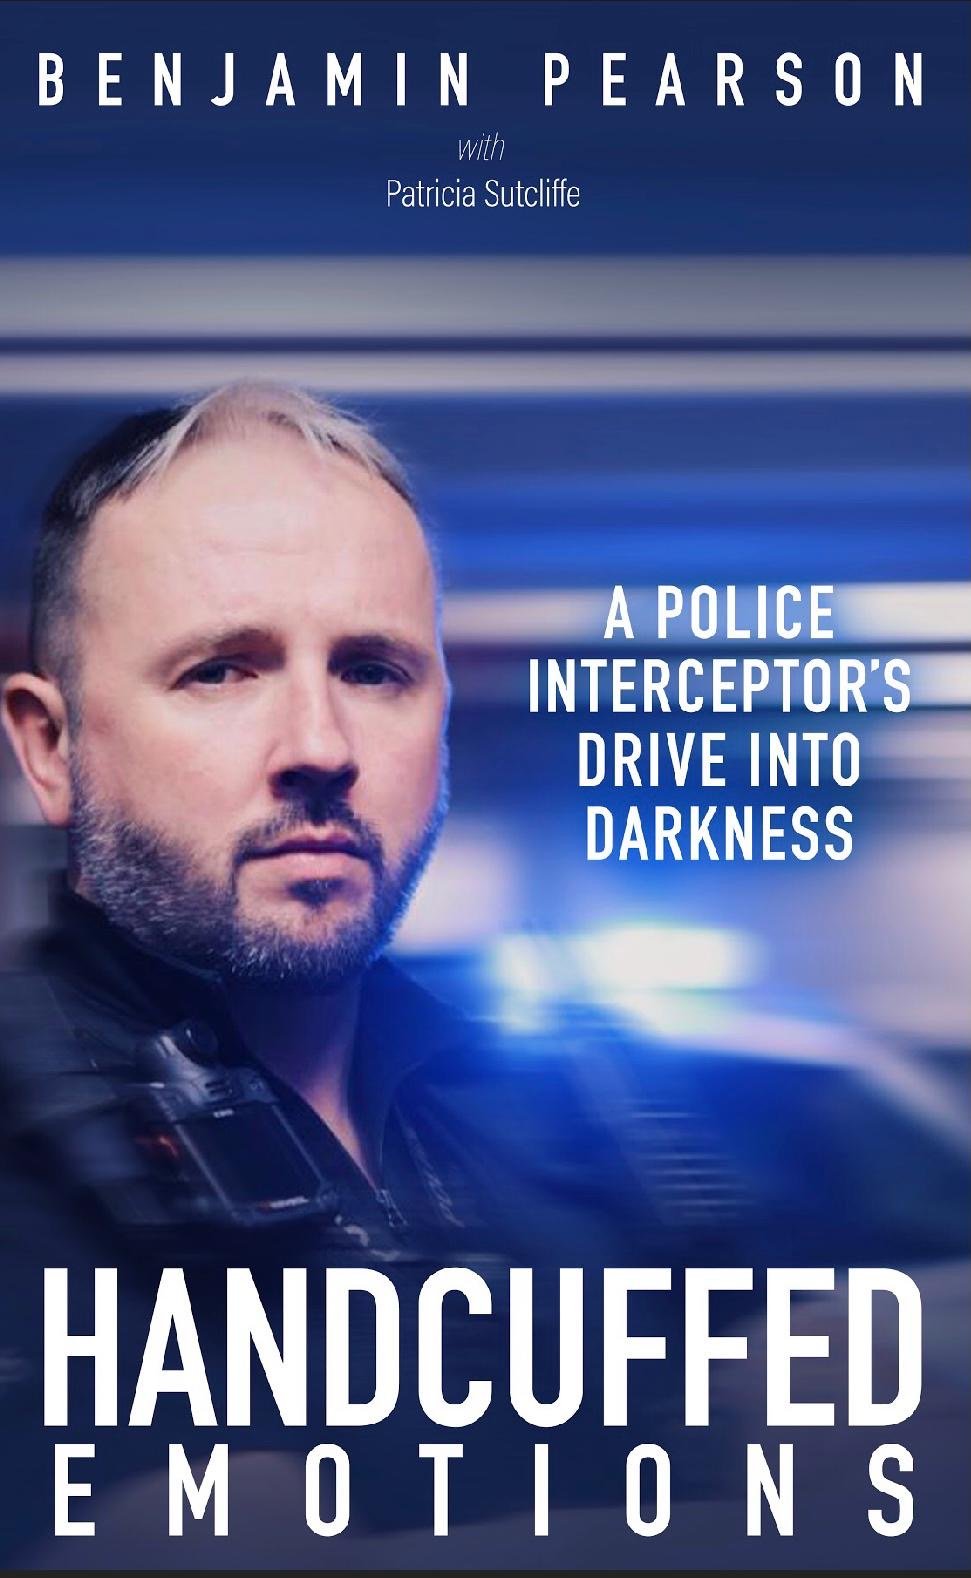 Limited edition hand signed ‘Handcuffed Emotions: A Police Interceptor's Drive Into Darkness’